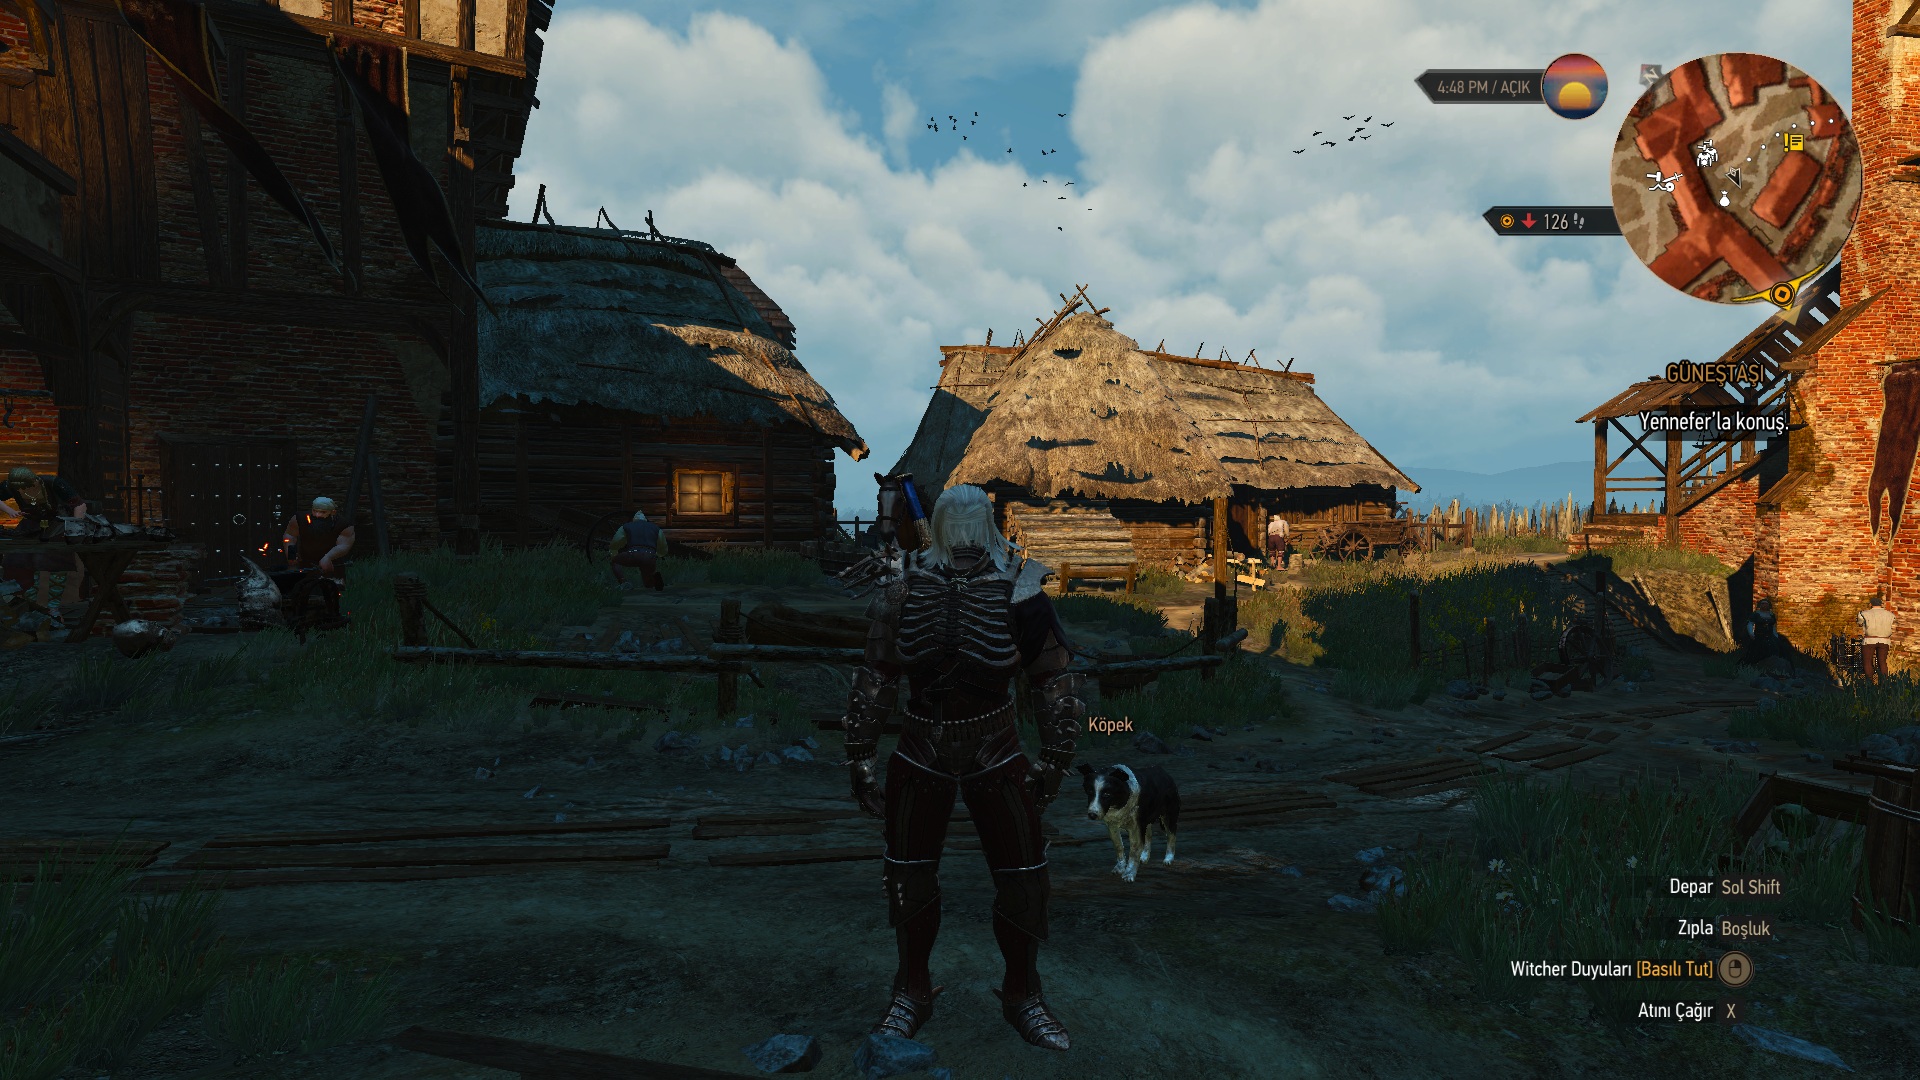 The Witcher 3 Screenshot 2021.01.19 - 16.49.08.15.png